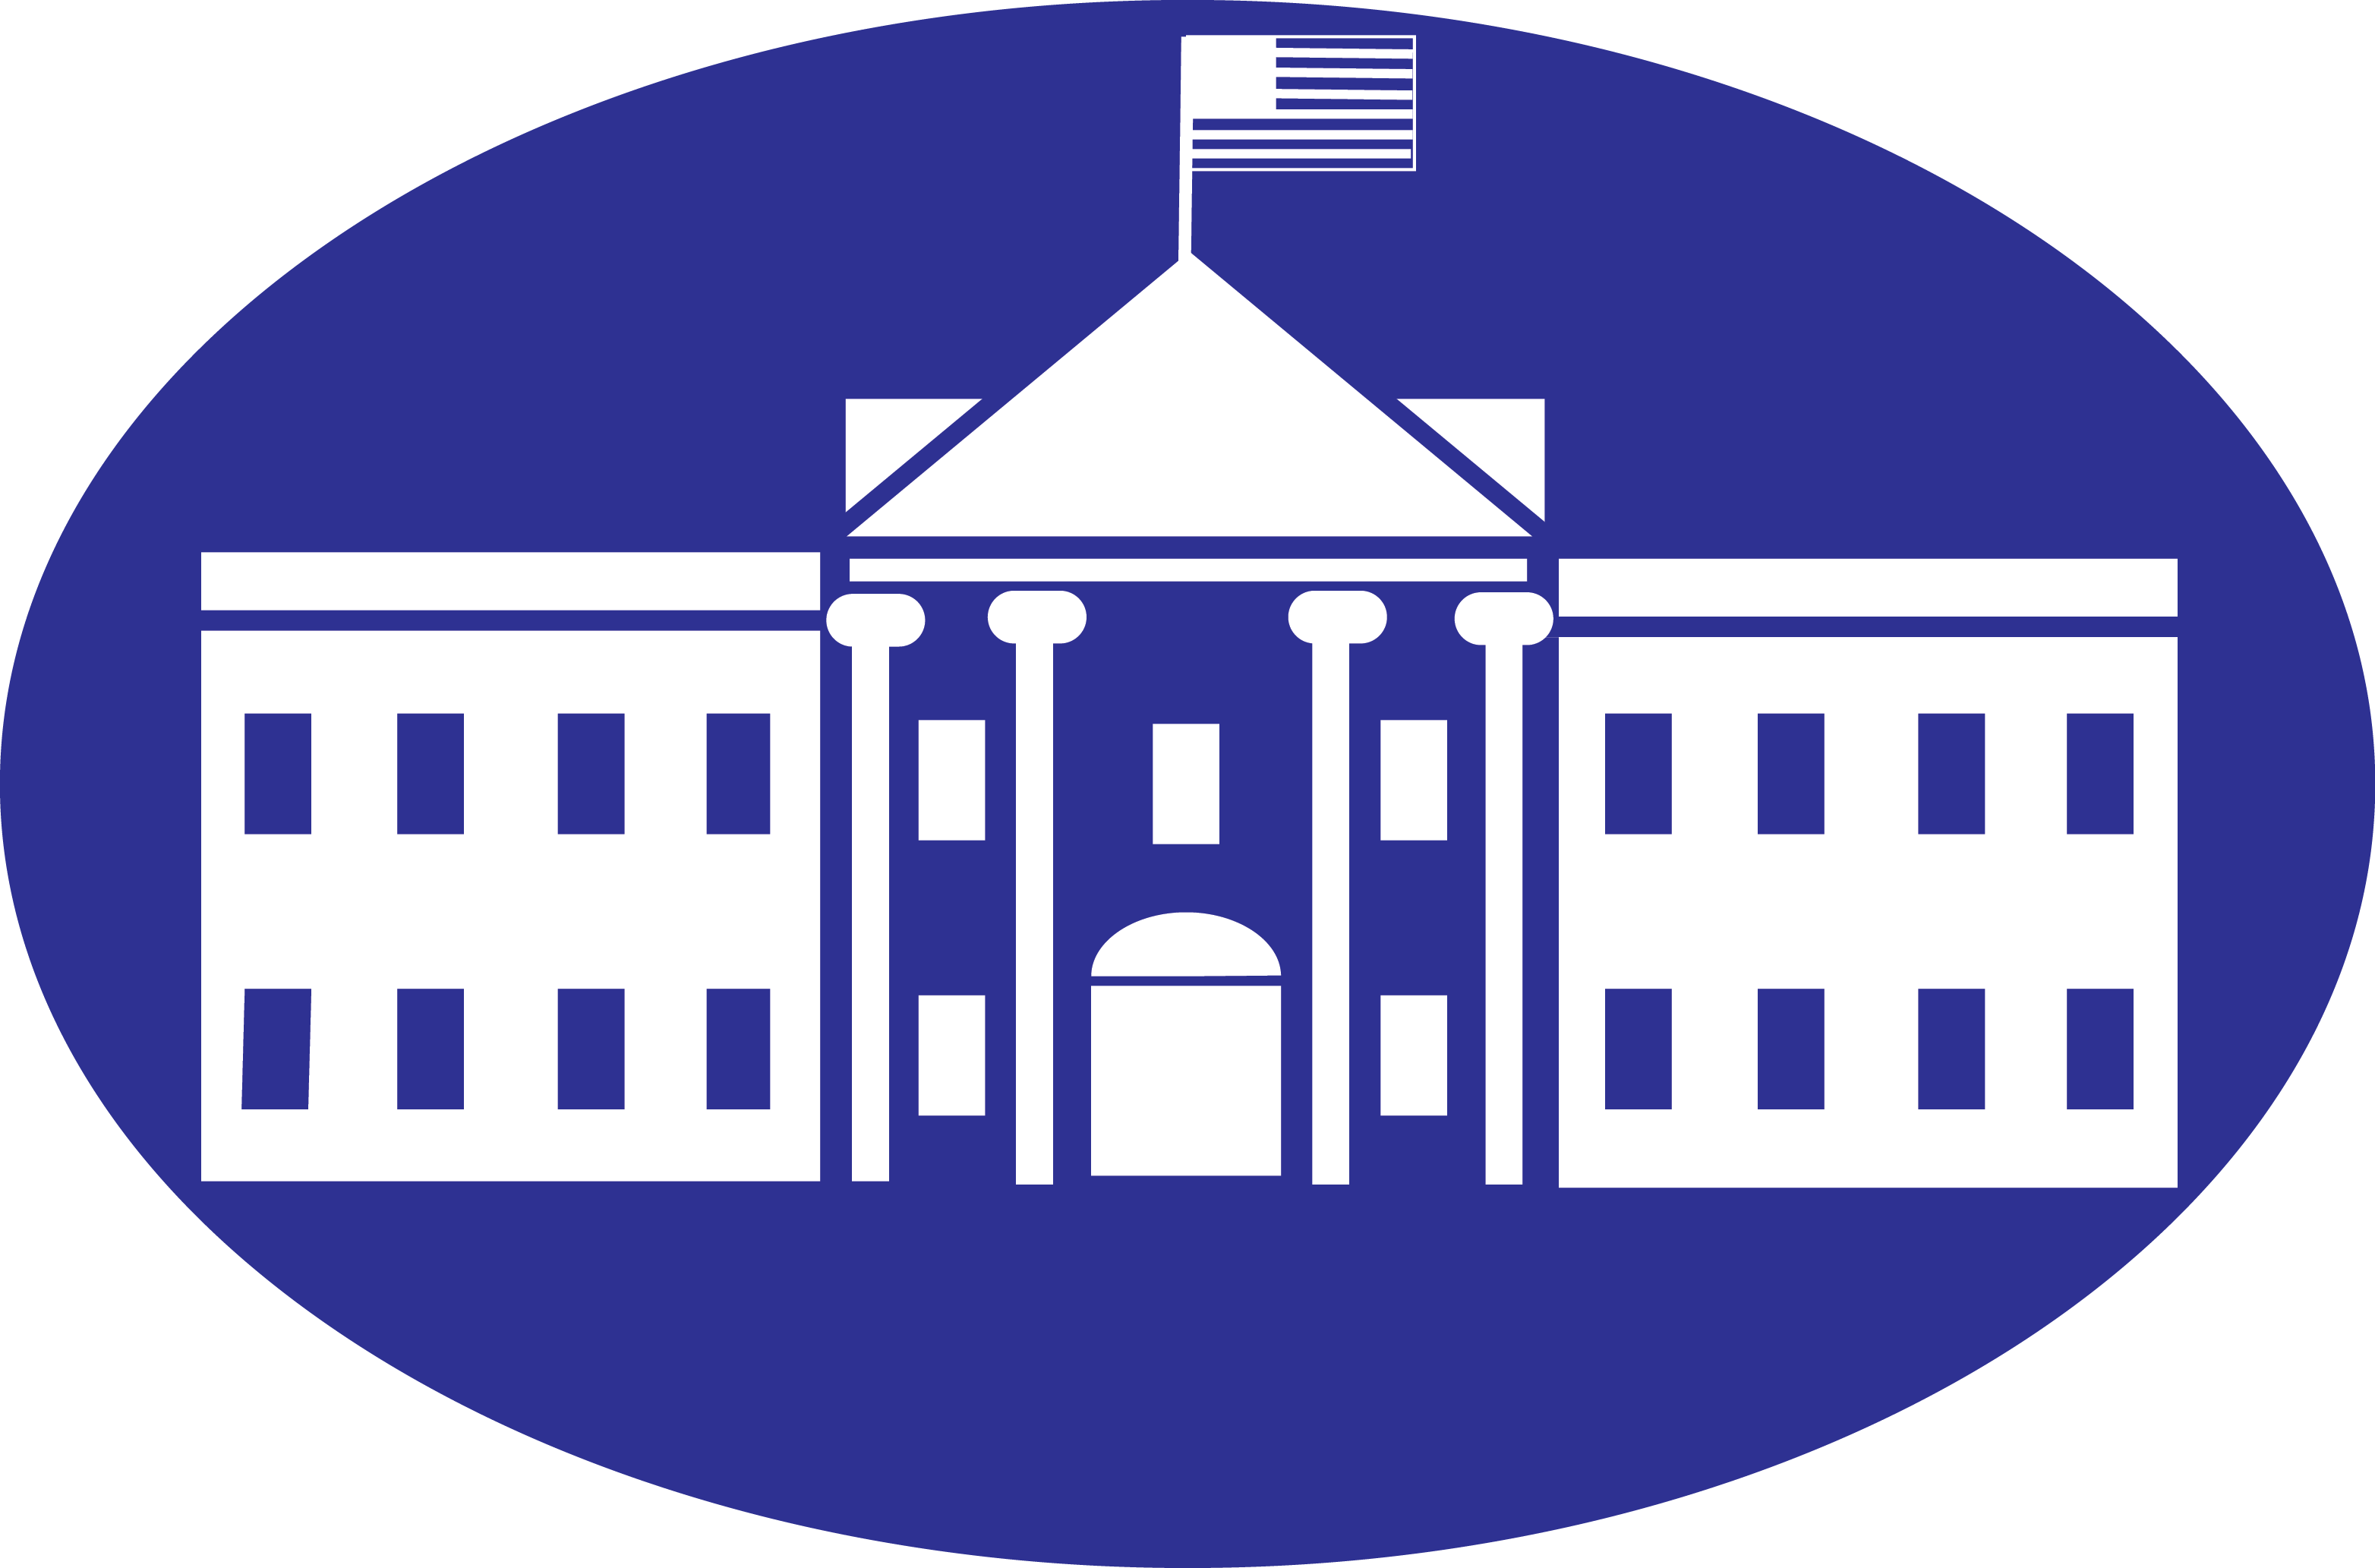 congress clipart federal system